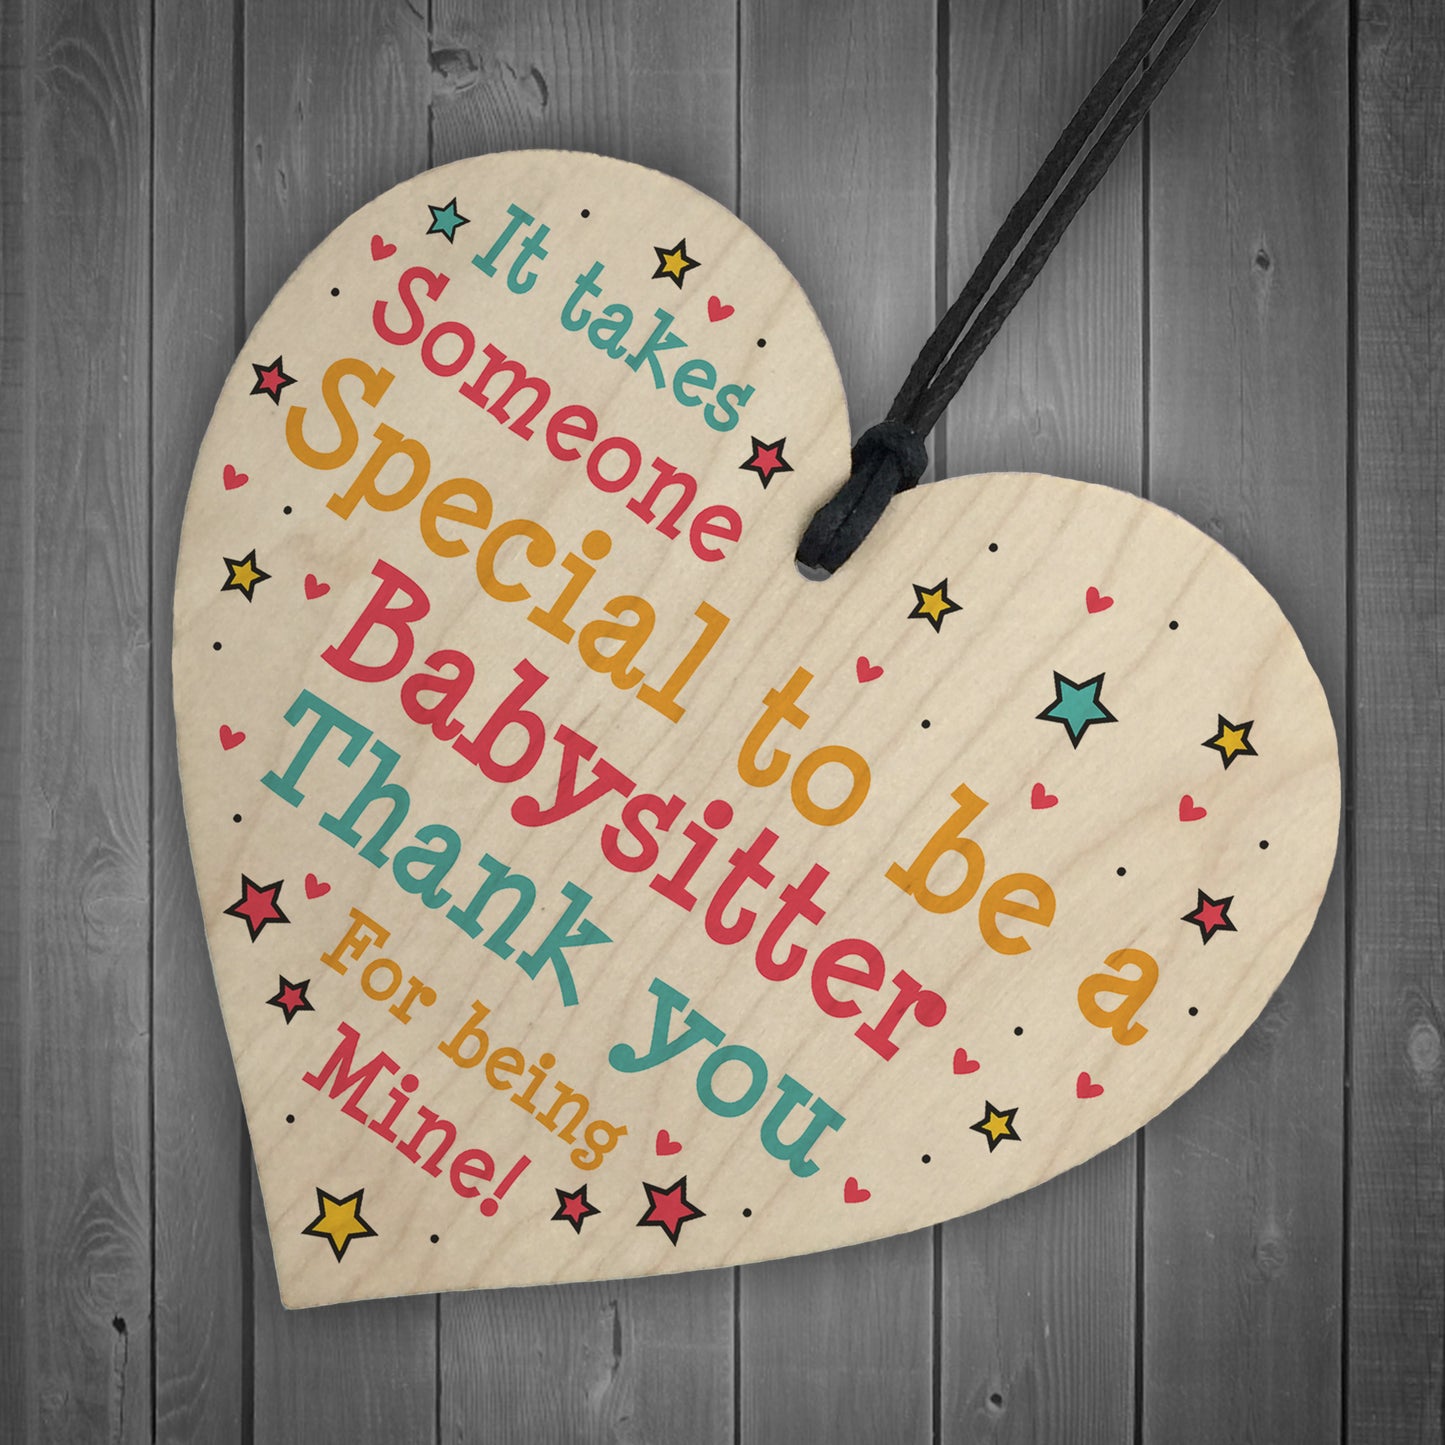 Babysitter Childminder Thank You Gift Present Wood Heart Gifts